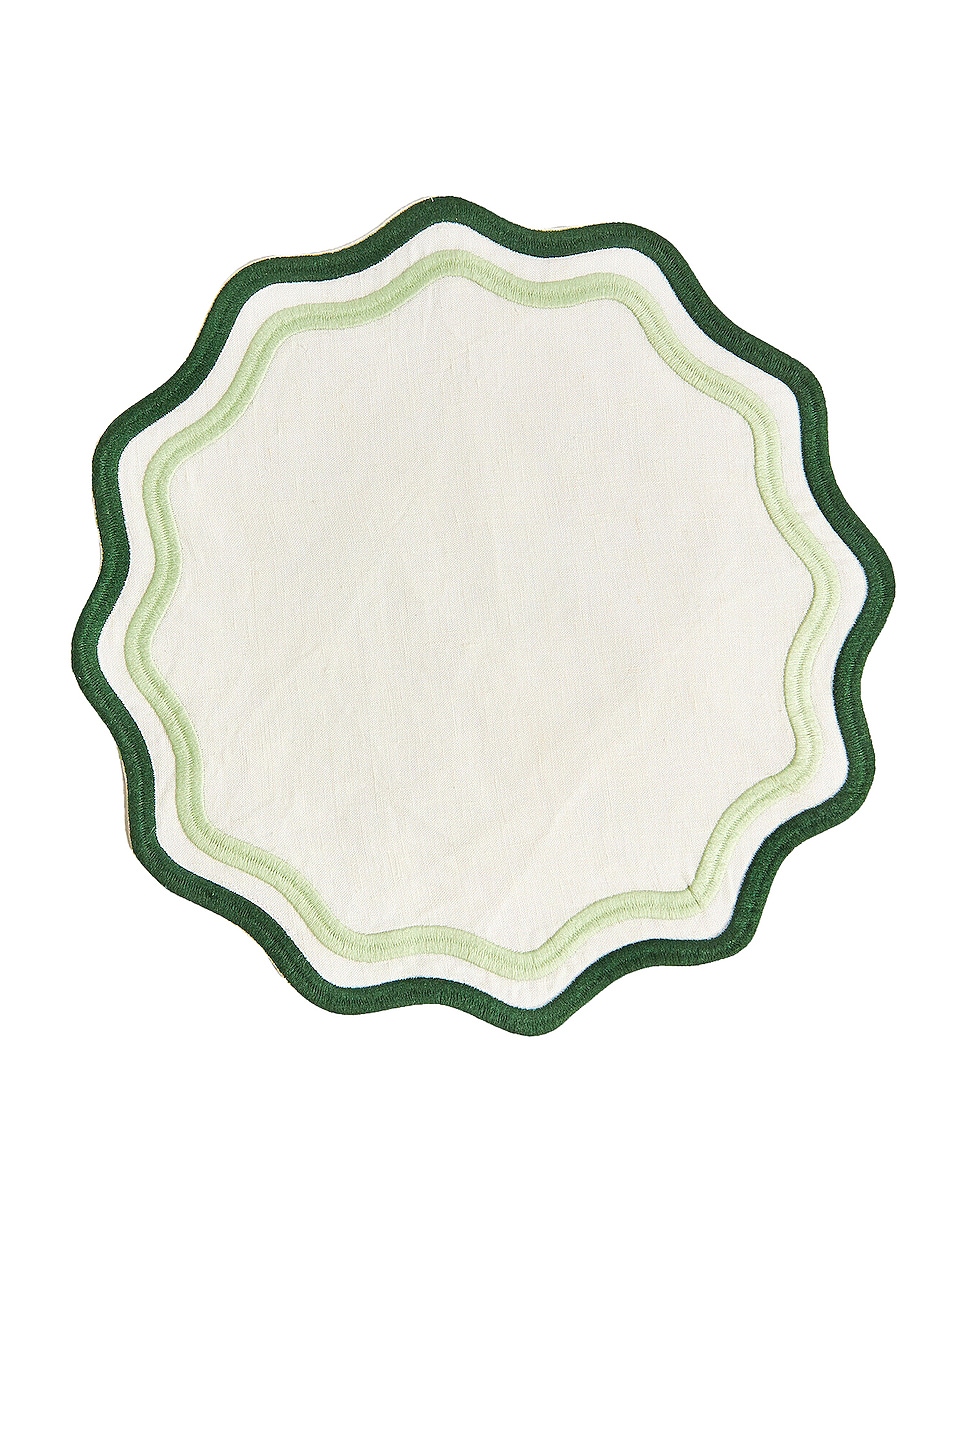 Image 1 of Misette Embroidered Linen Placemats Set Of 4 in Colorblock Dark Green & Sage